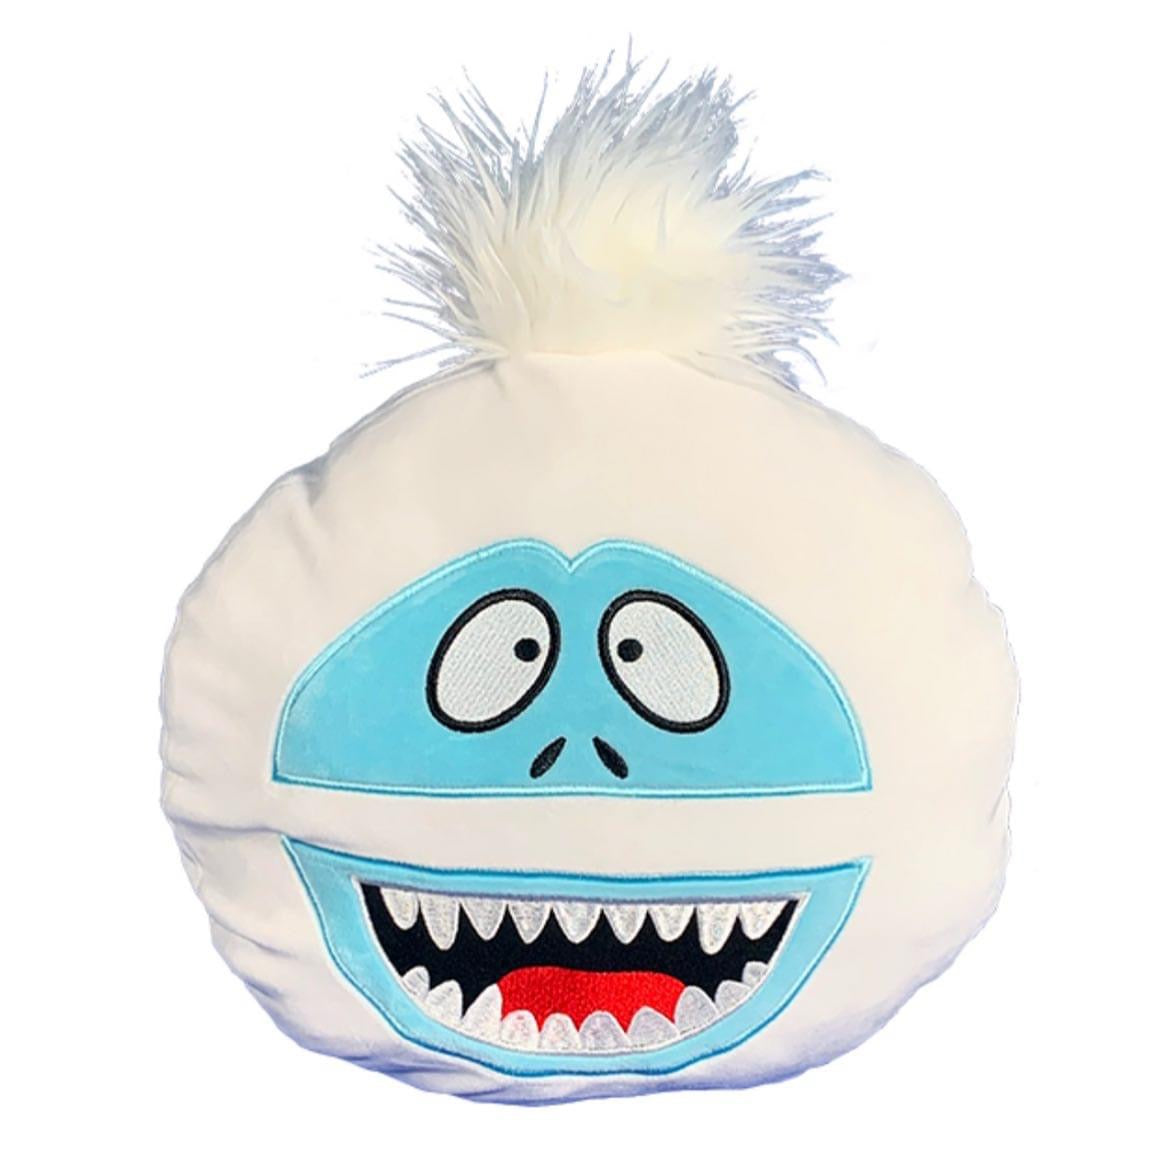 Stuff-A-Squishy Take Home Kit: Individual or Party